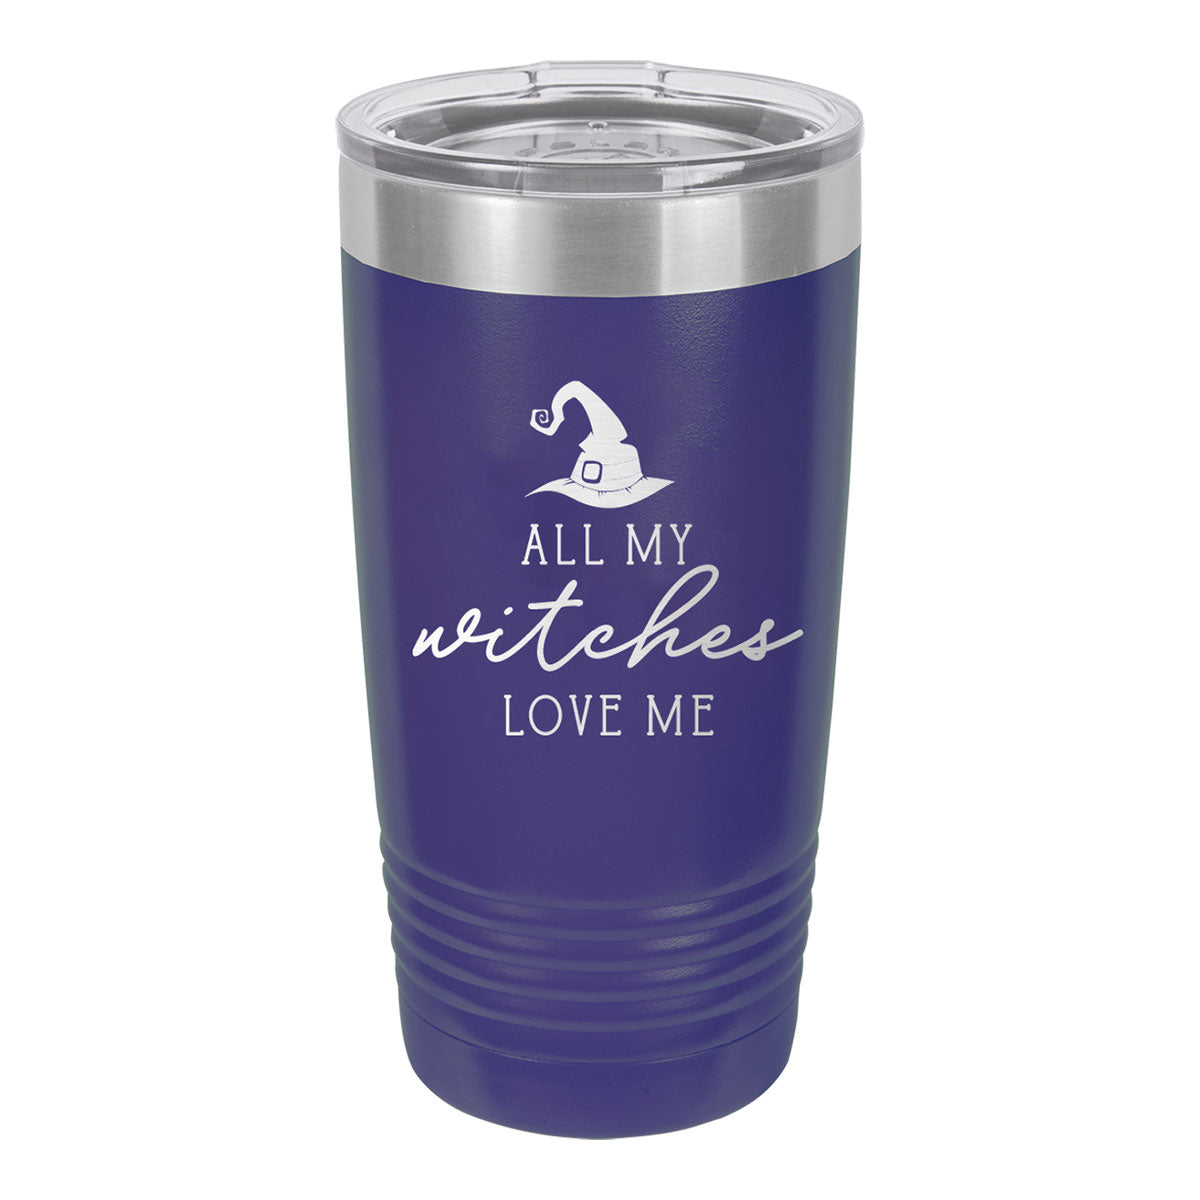 All my Witches Purple 20oz Insulated Tumbler